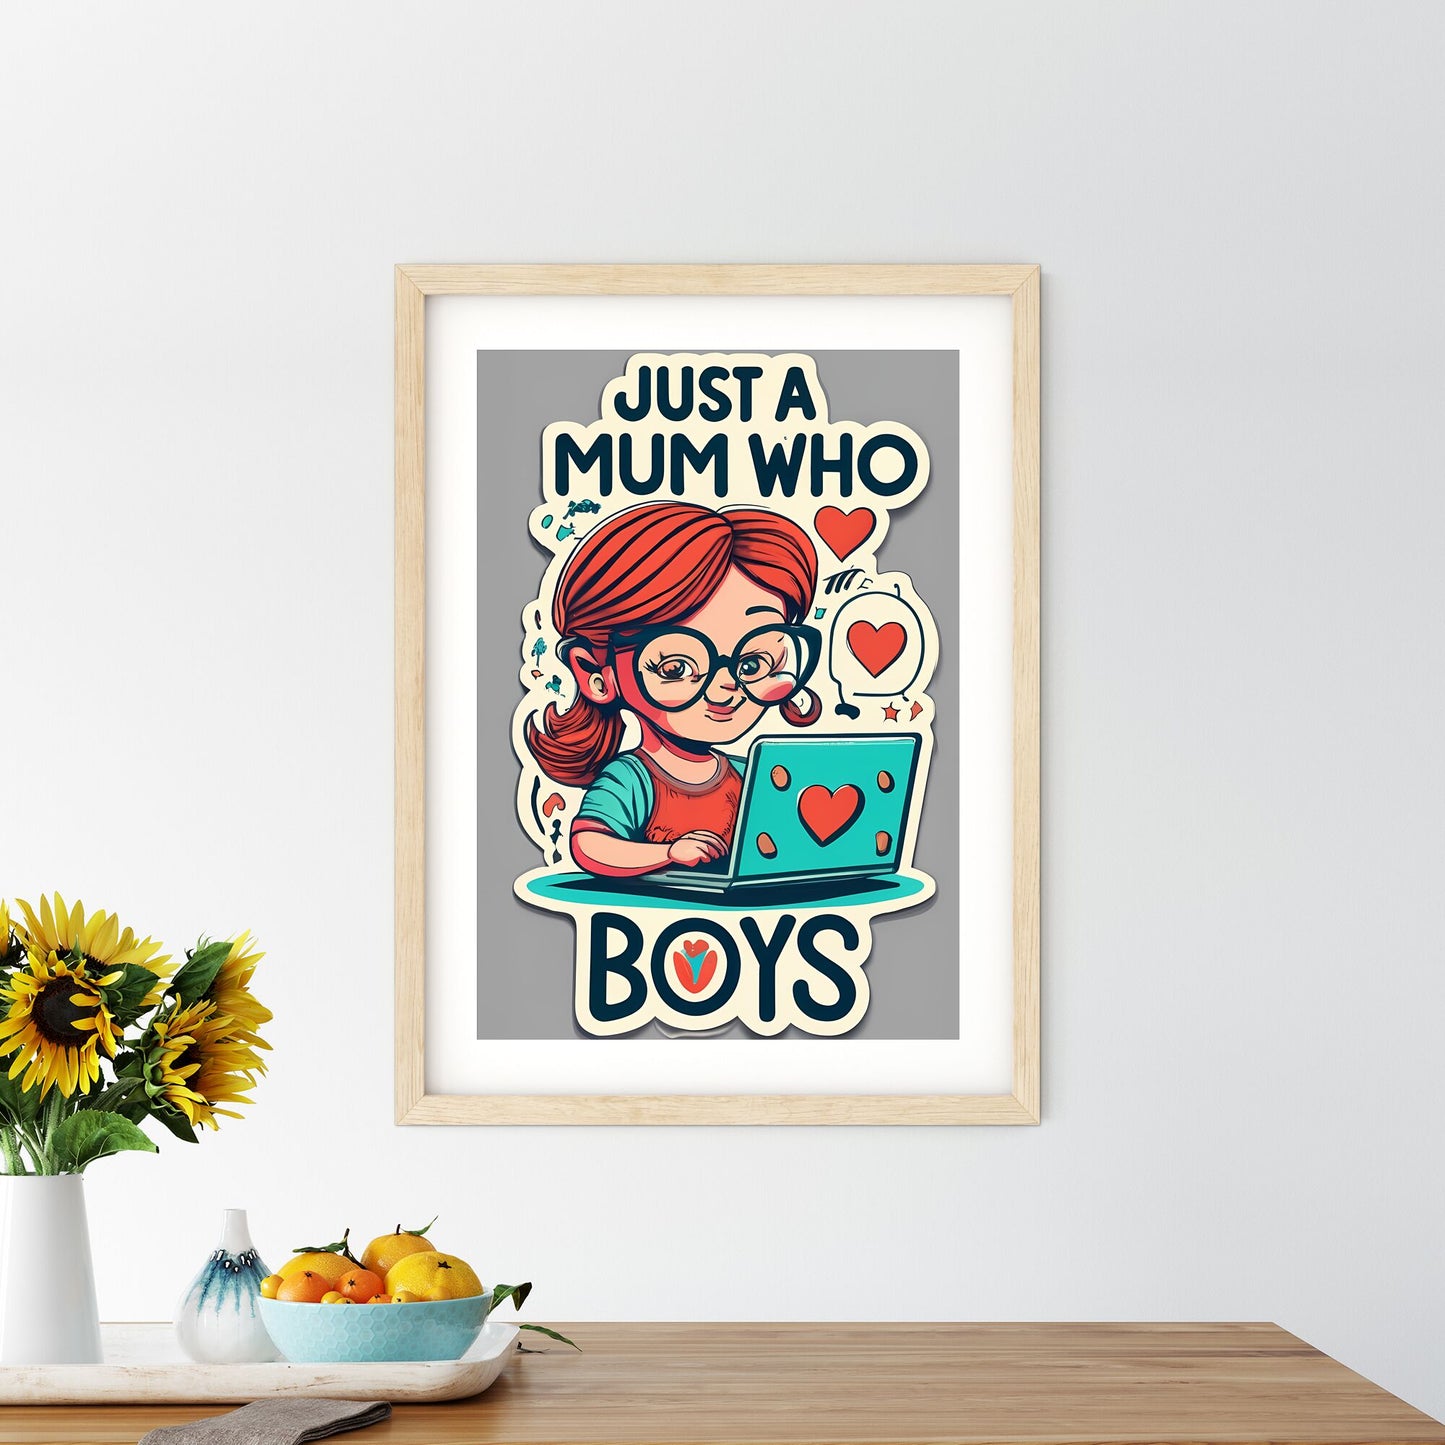 Just A Mom Who Loves Boys - A Sticker Of A Girl Using A Laptop Art Print Default Title